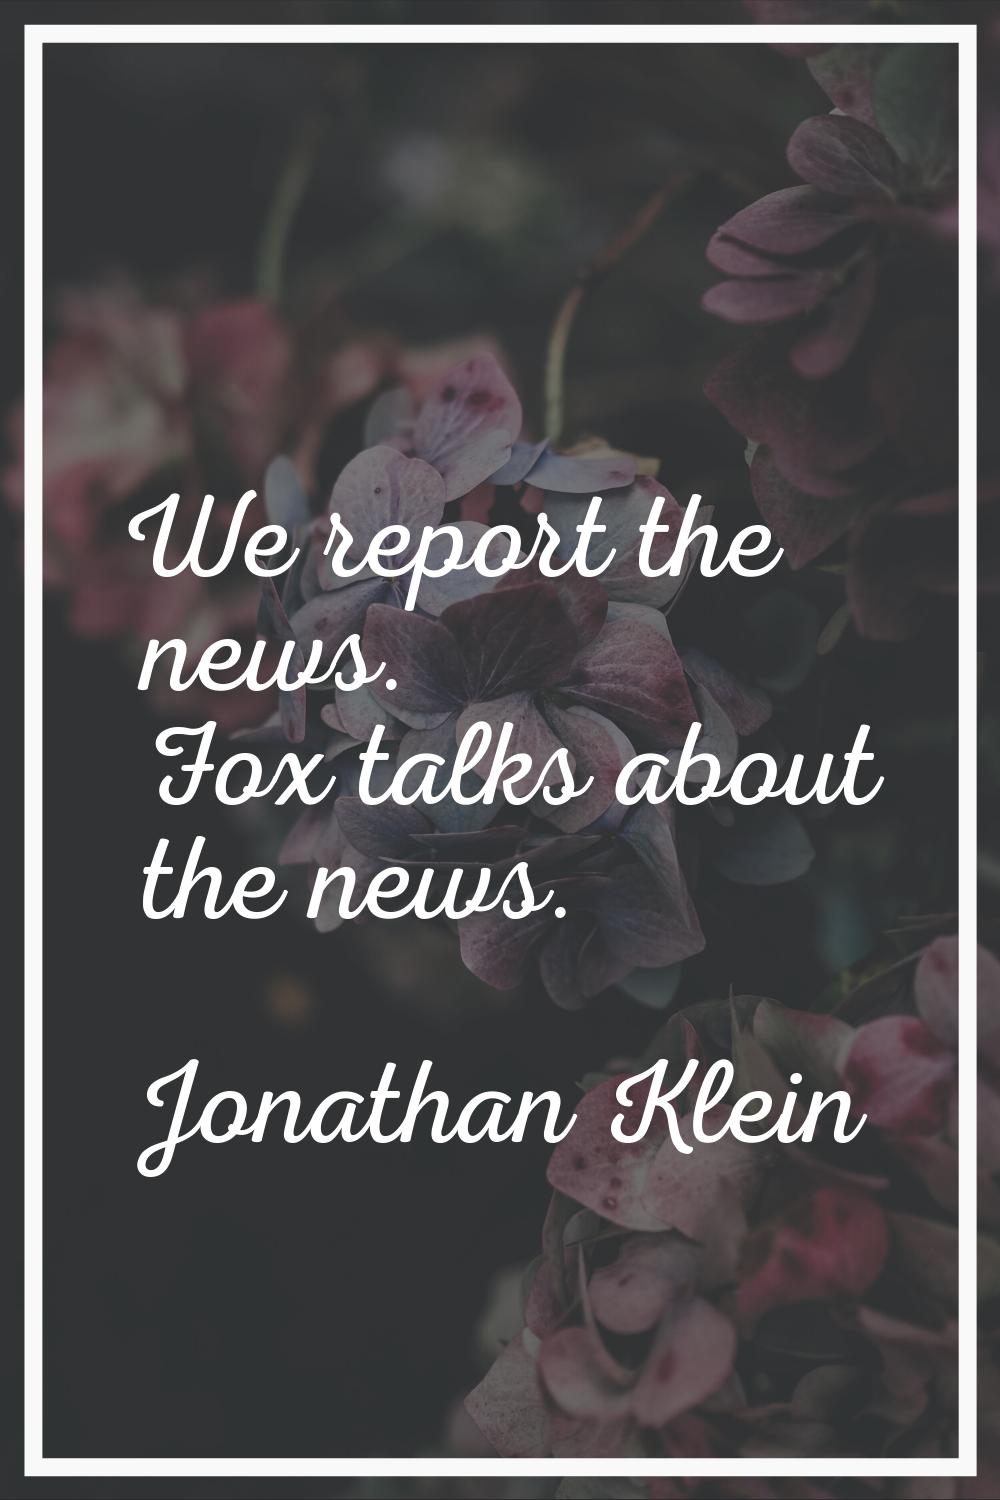 We report the news. Fox talks about the news.